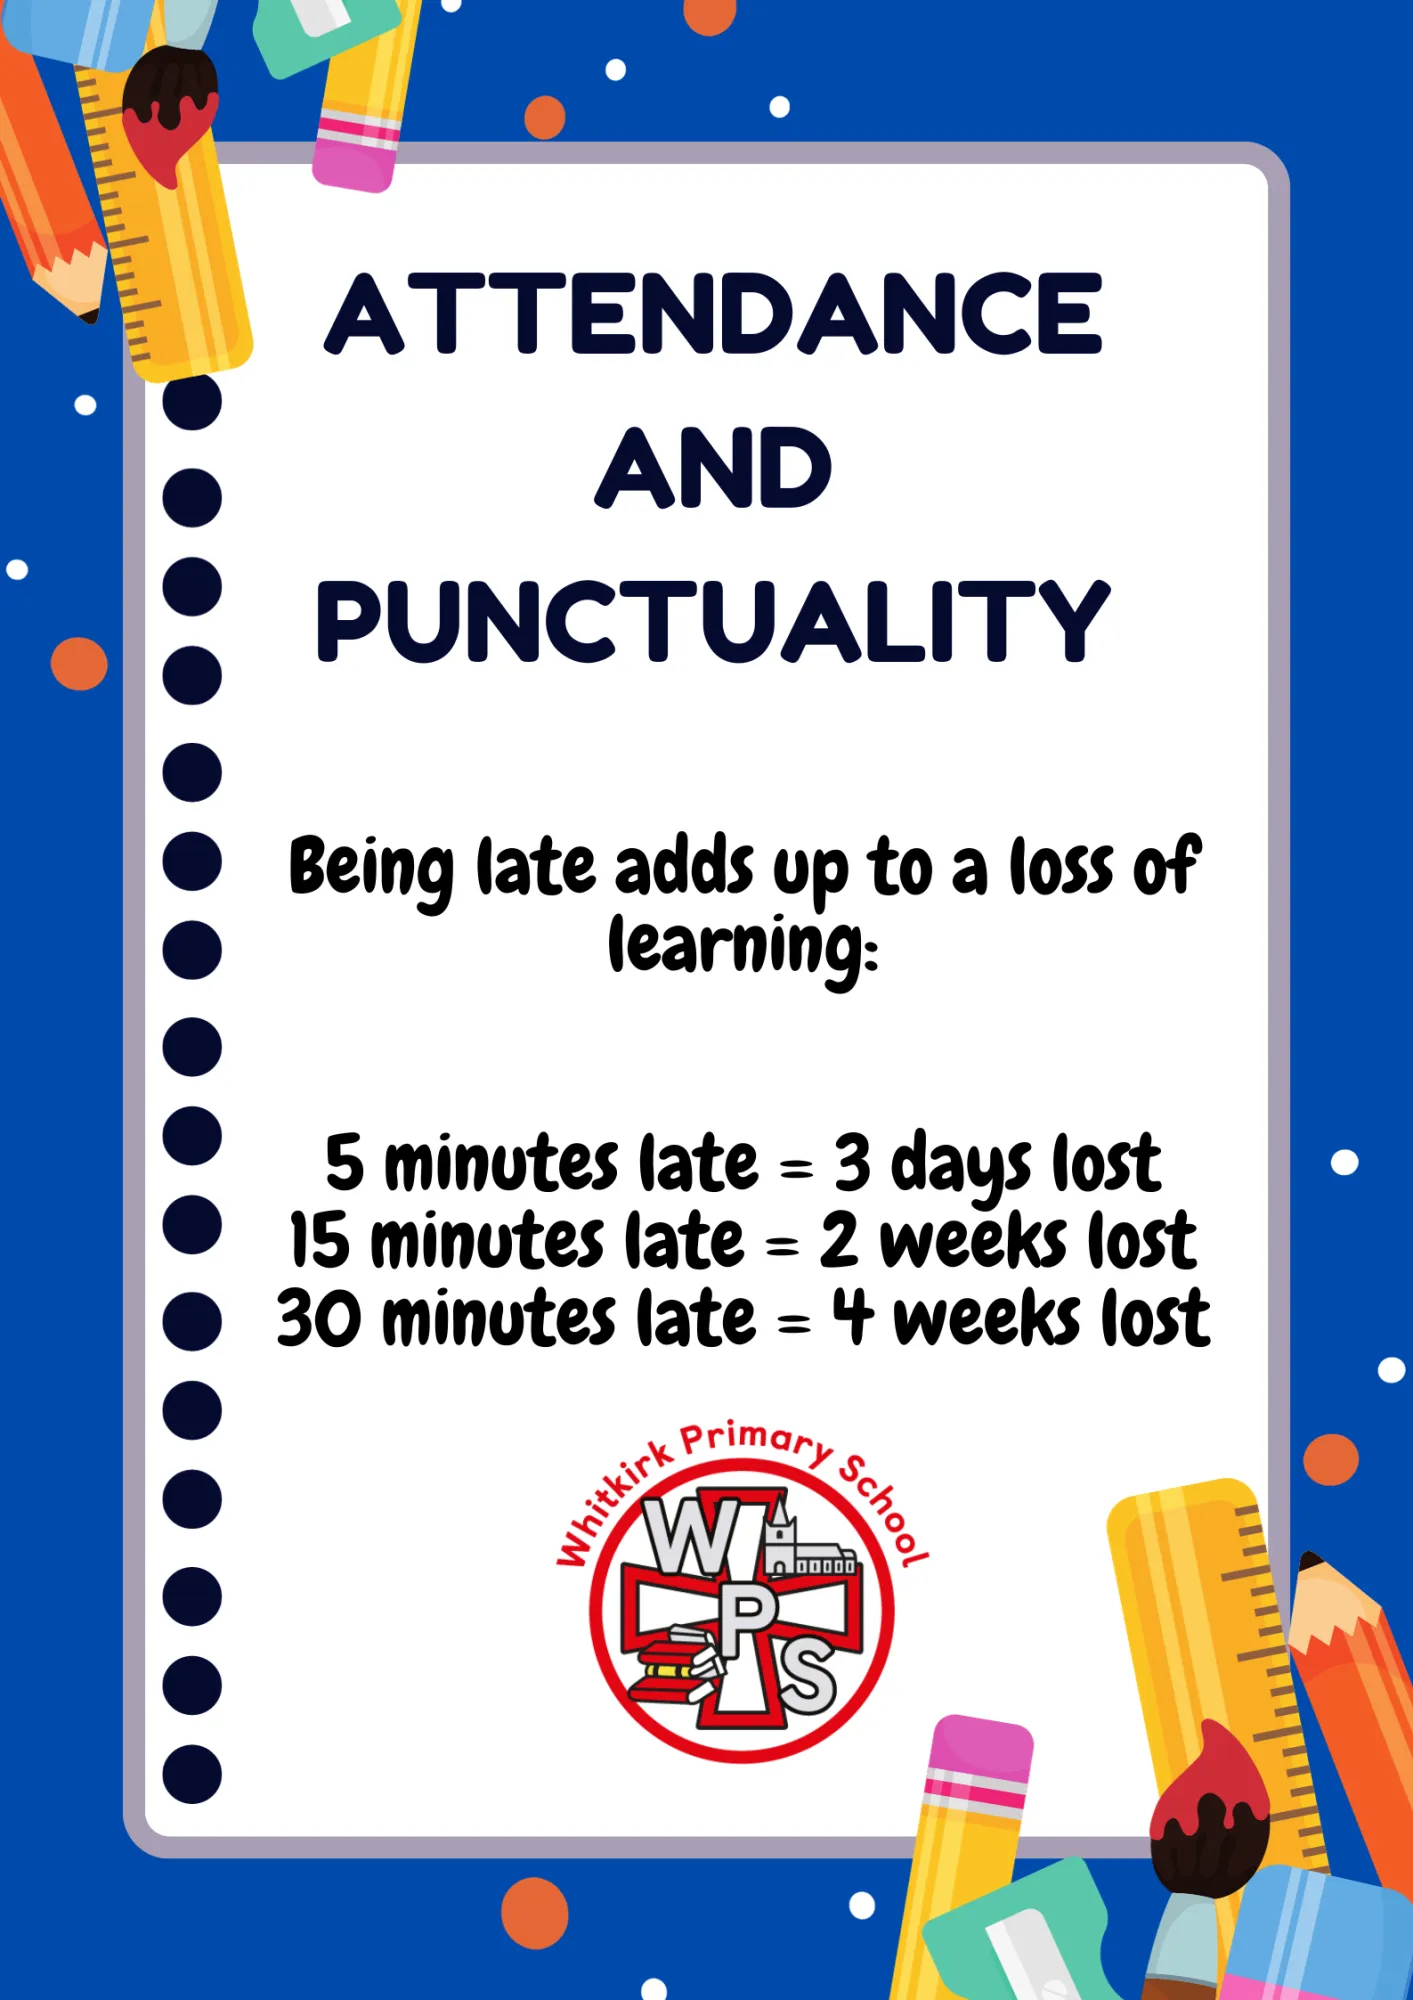 Attendance and punctuality (1)